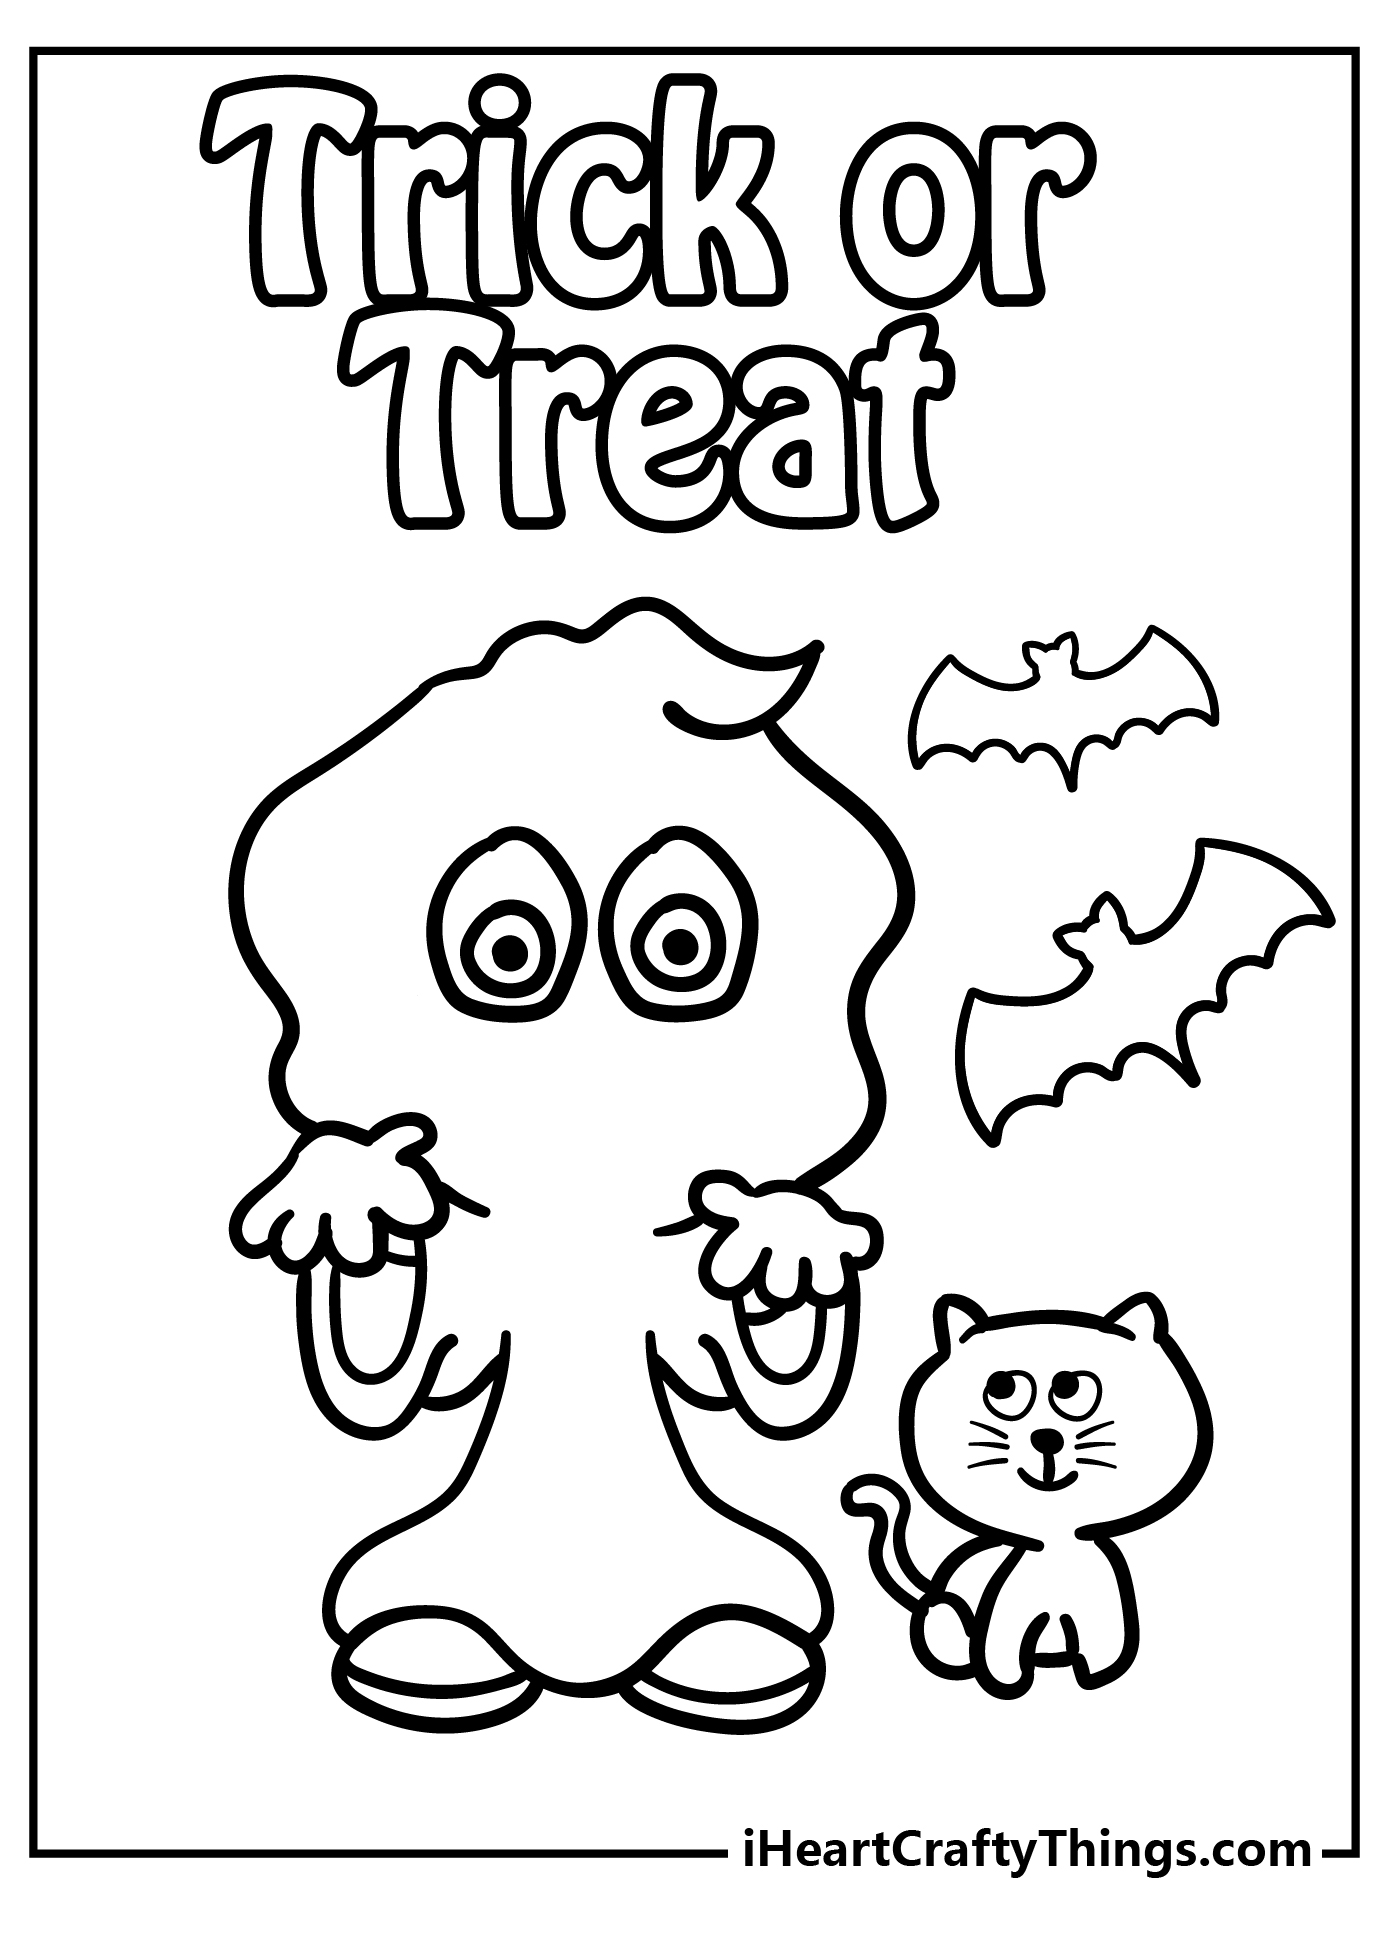 Trick Or Treat Coloring Book for adults free download